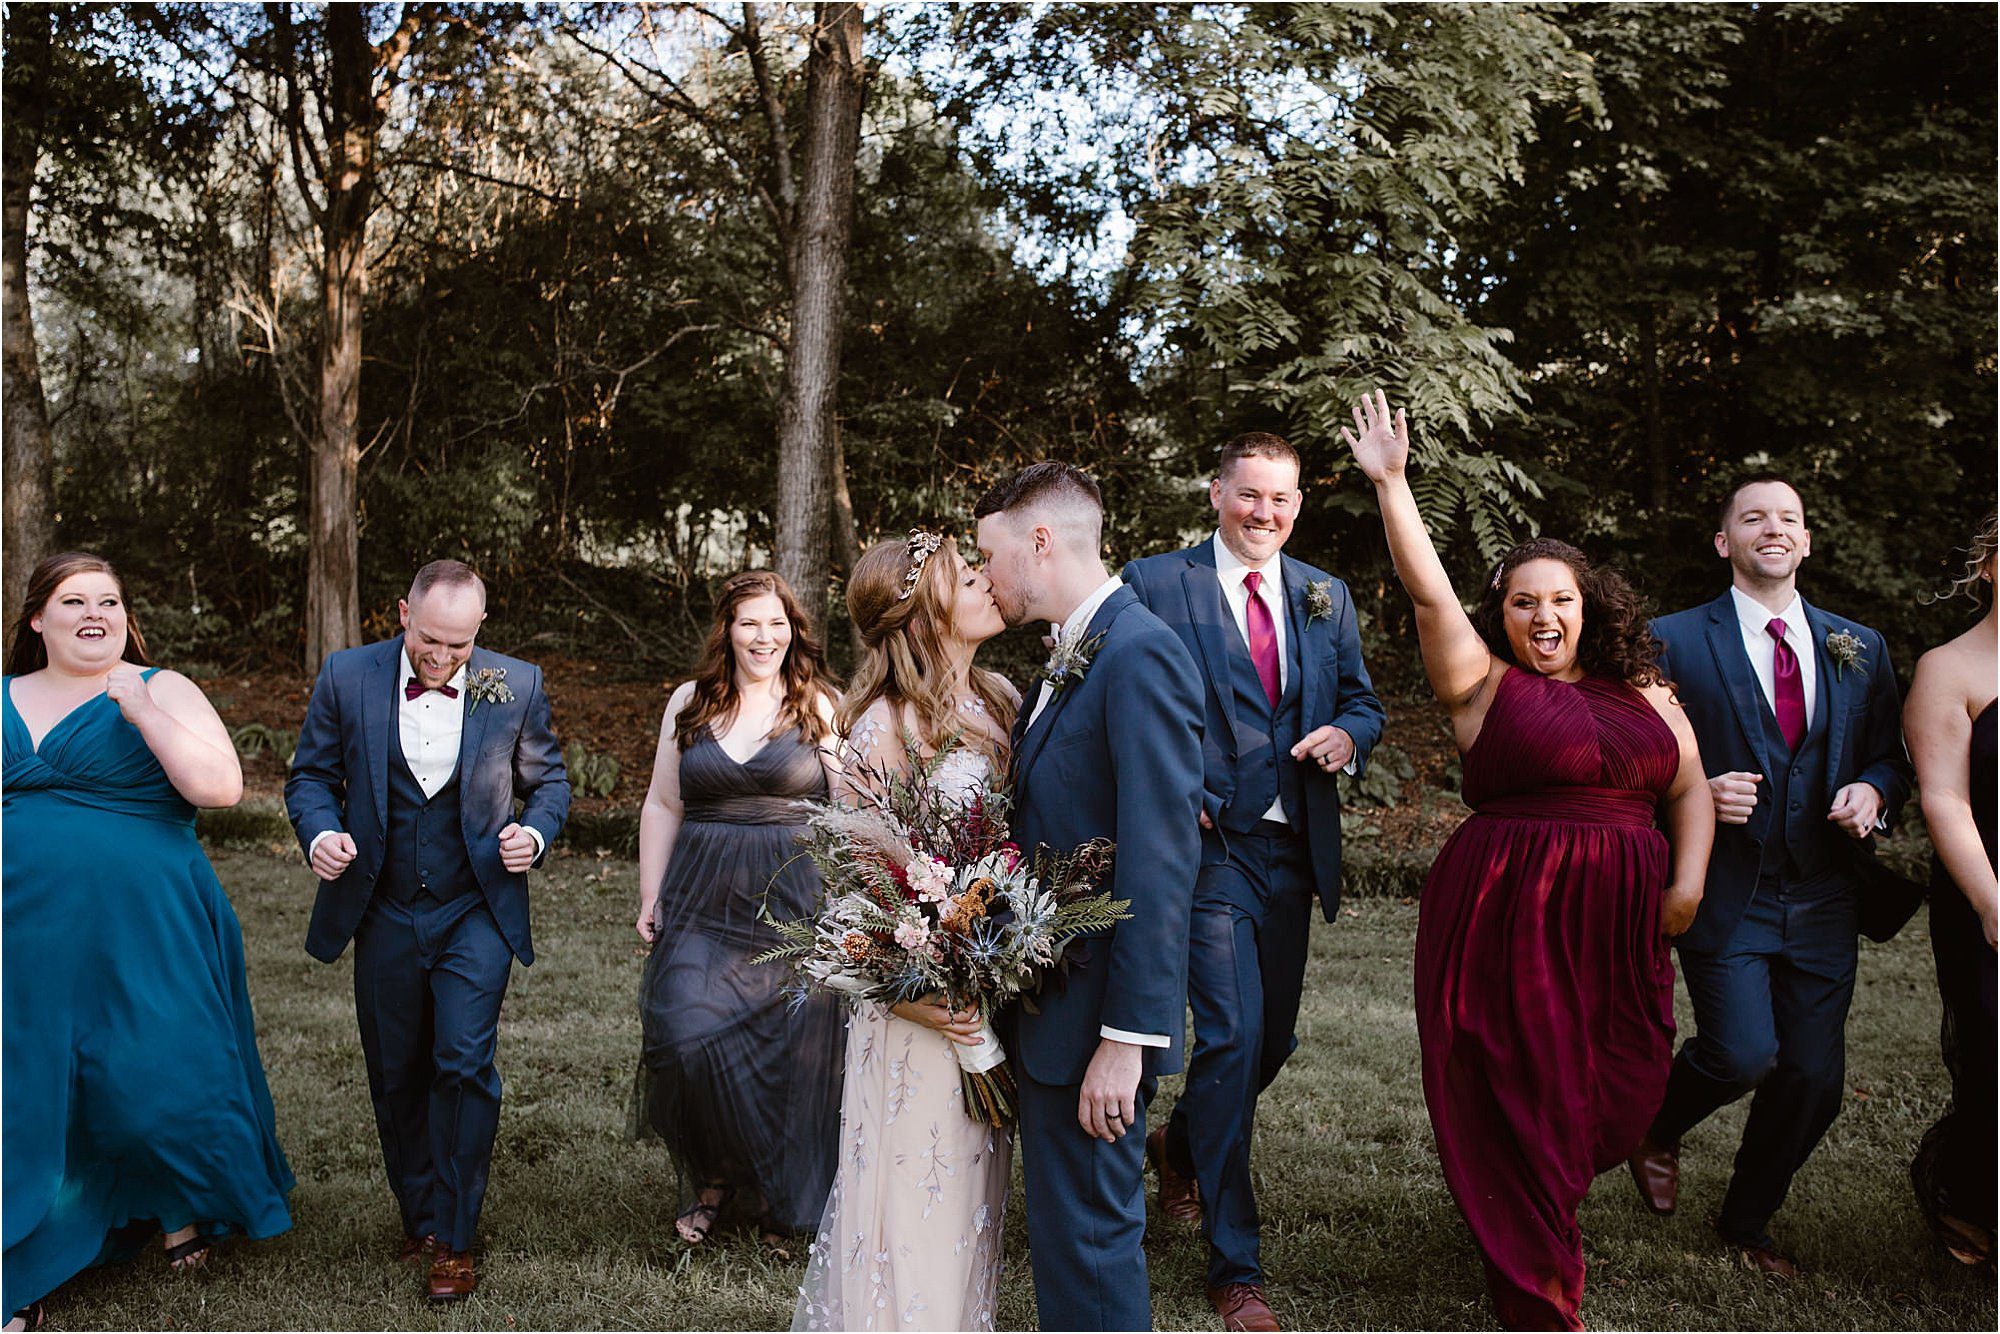 jewel-toned wedding at private estate